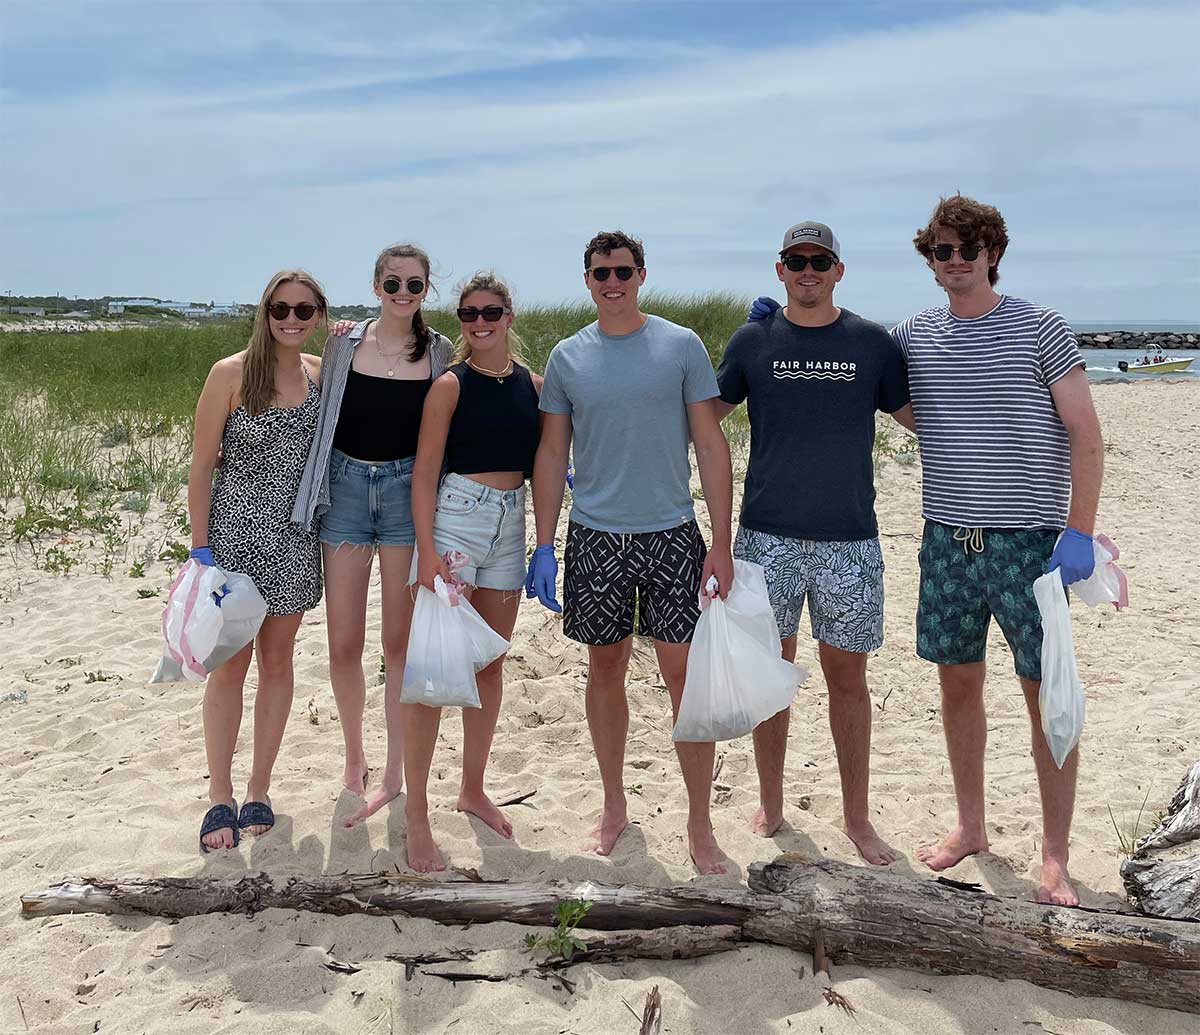 A group on of people stand together and smile for a photo during the Fair Harbor Gin Beach Cleanup and Happy Hour in Montauk